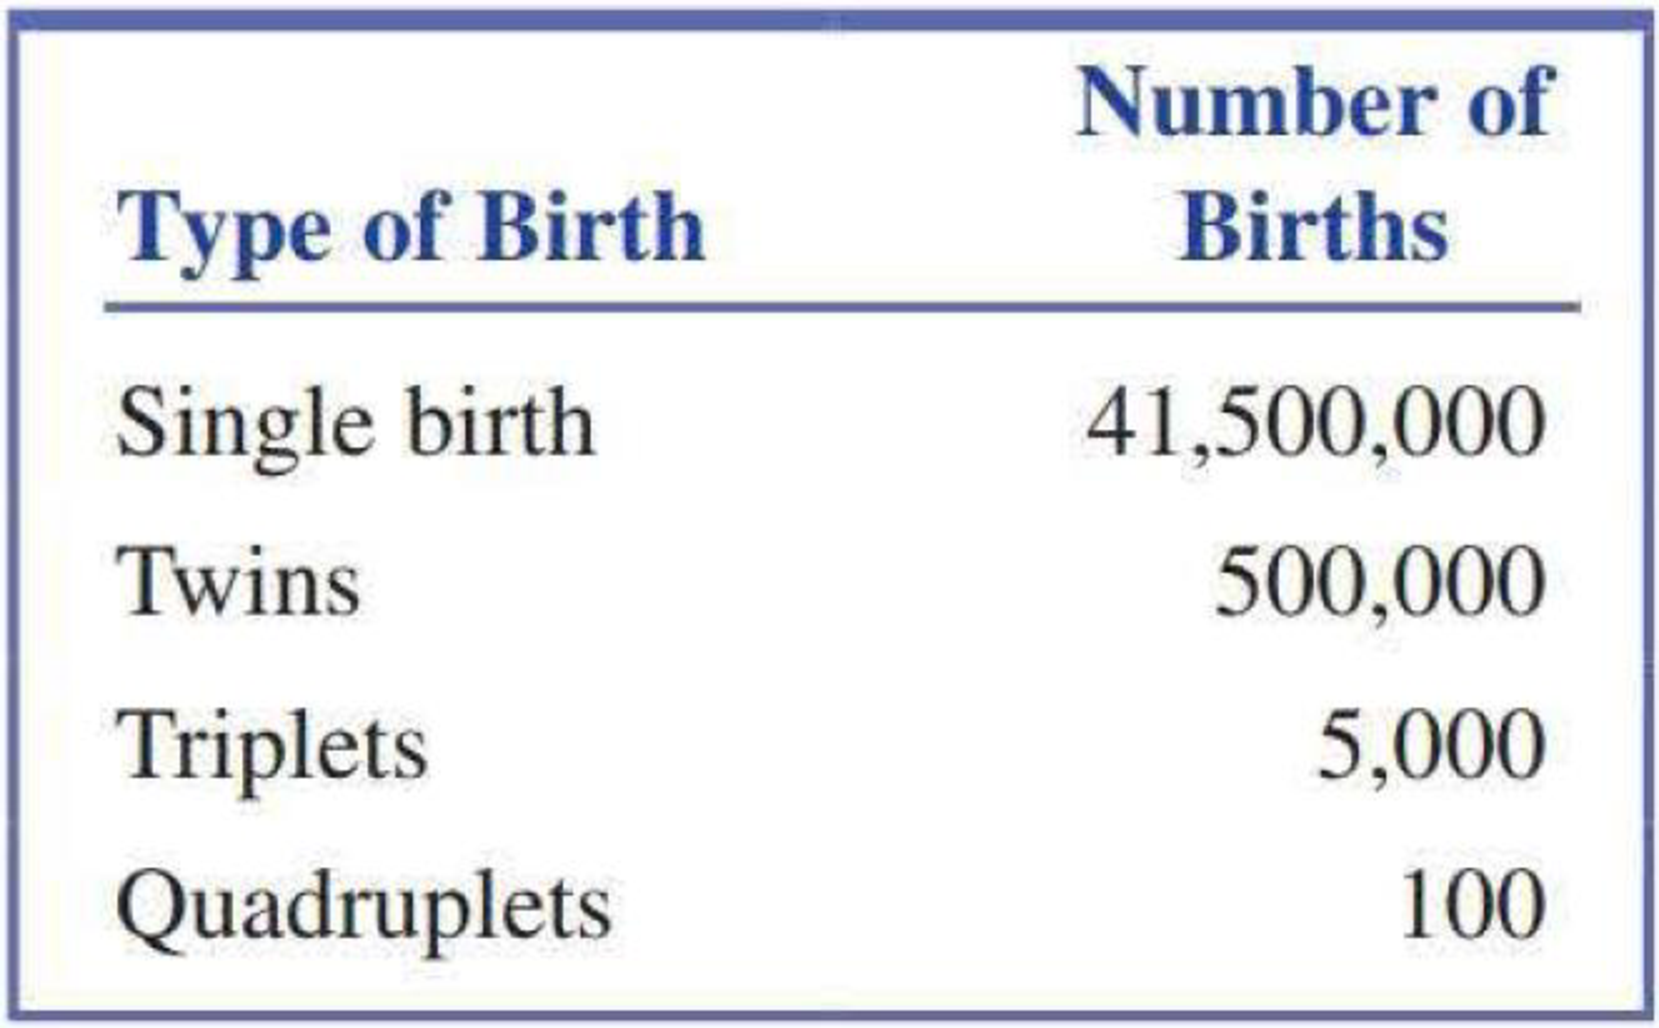 Refer To The Following Information On Full Term Births In The United States Over A Given Period Of Time Use This Information To Estimate The Probability That A Randomly Selected Pregnant Woman Who